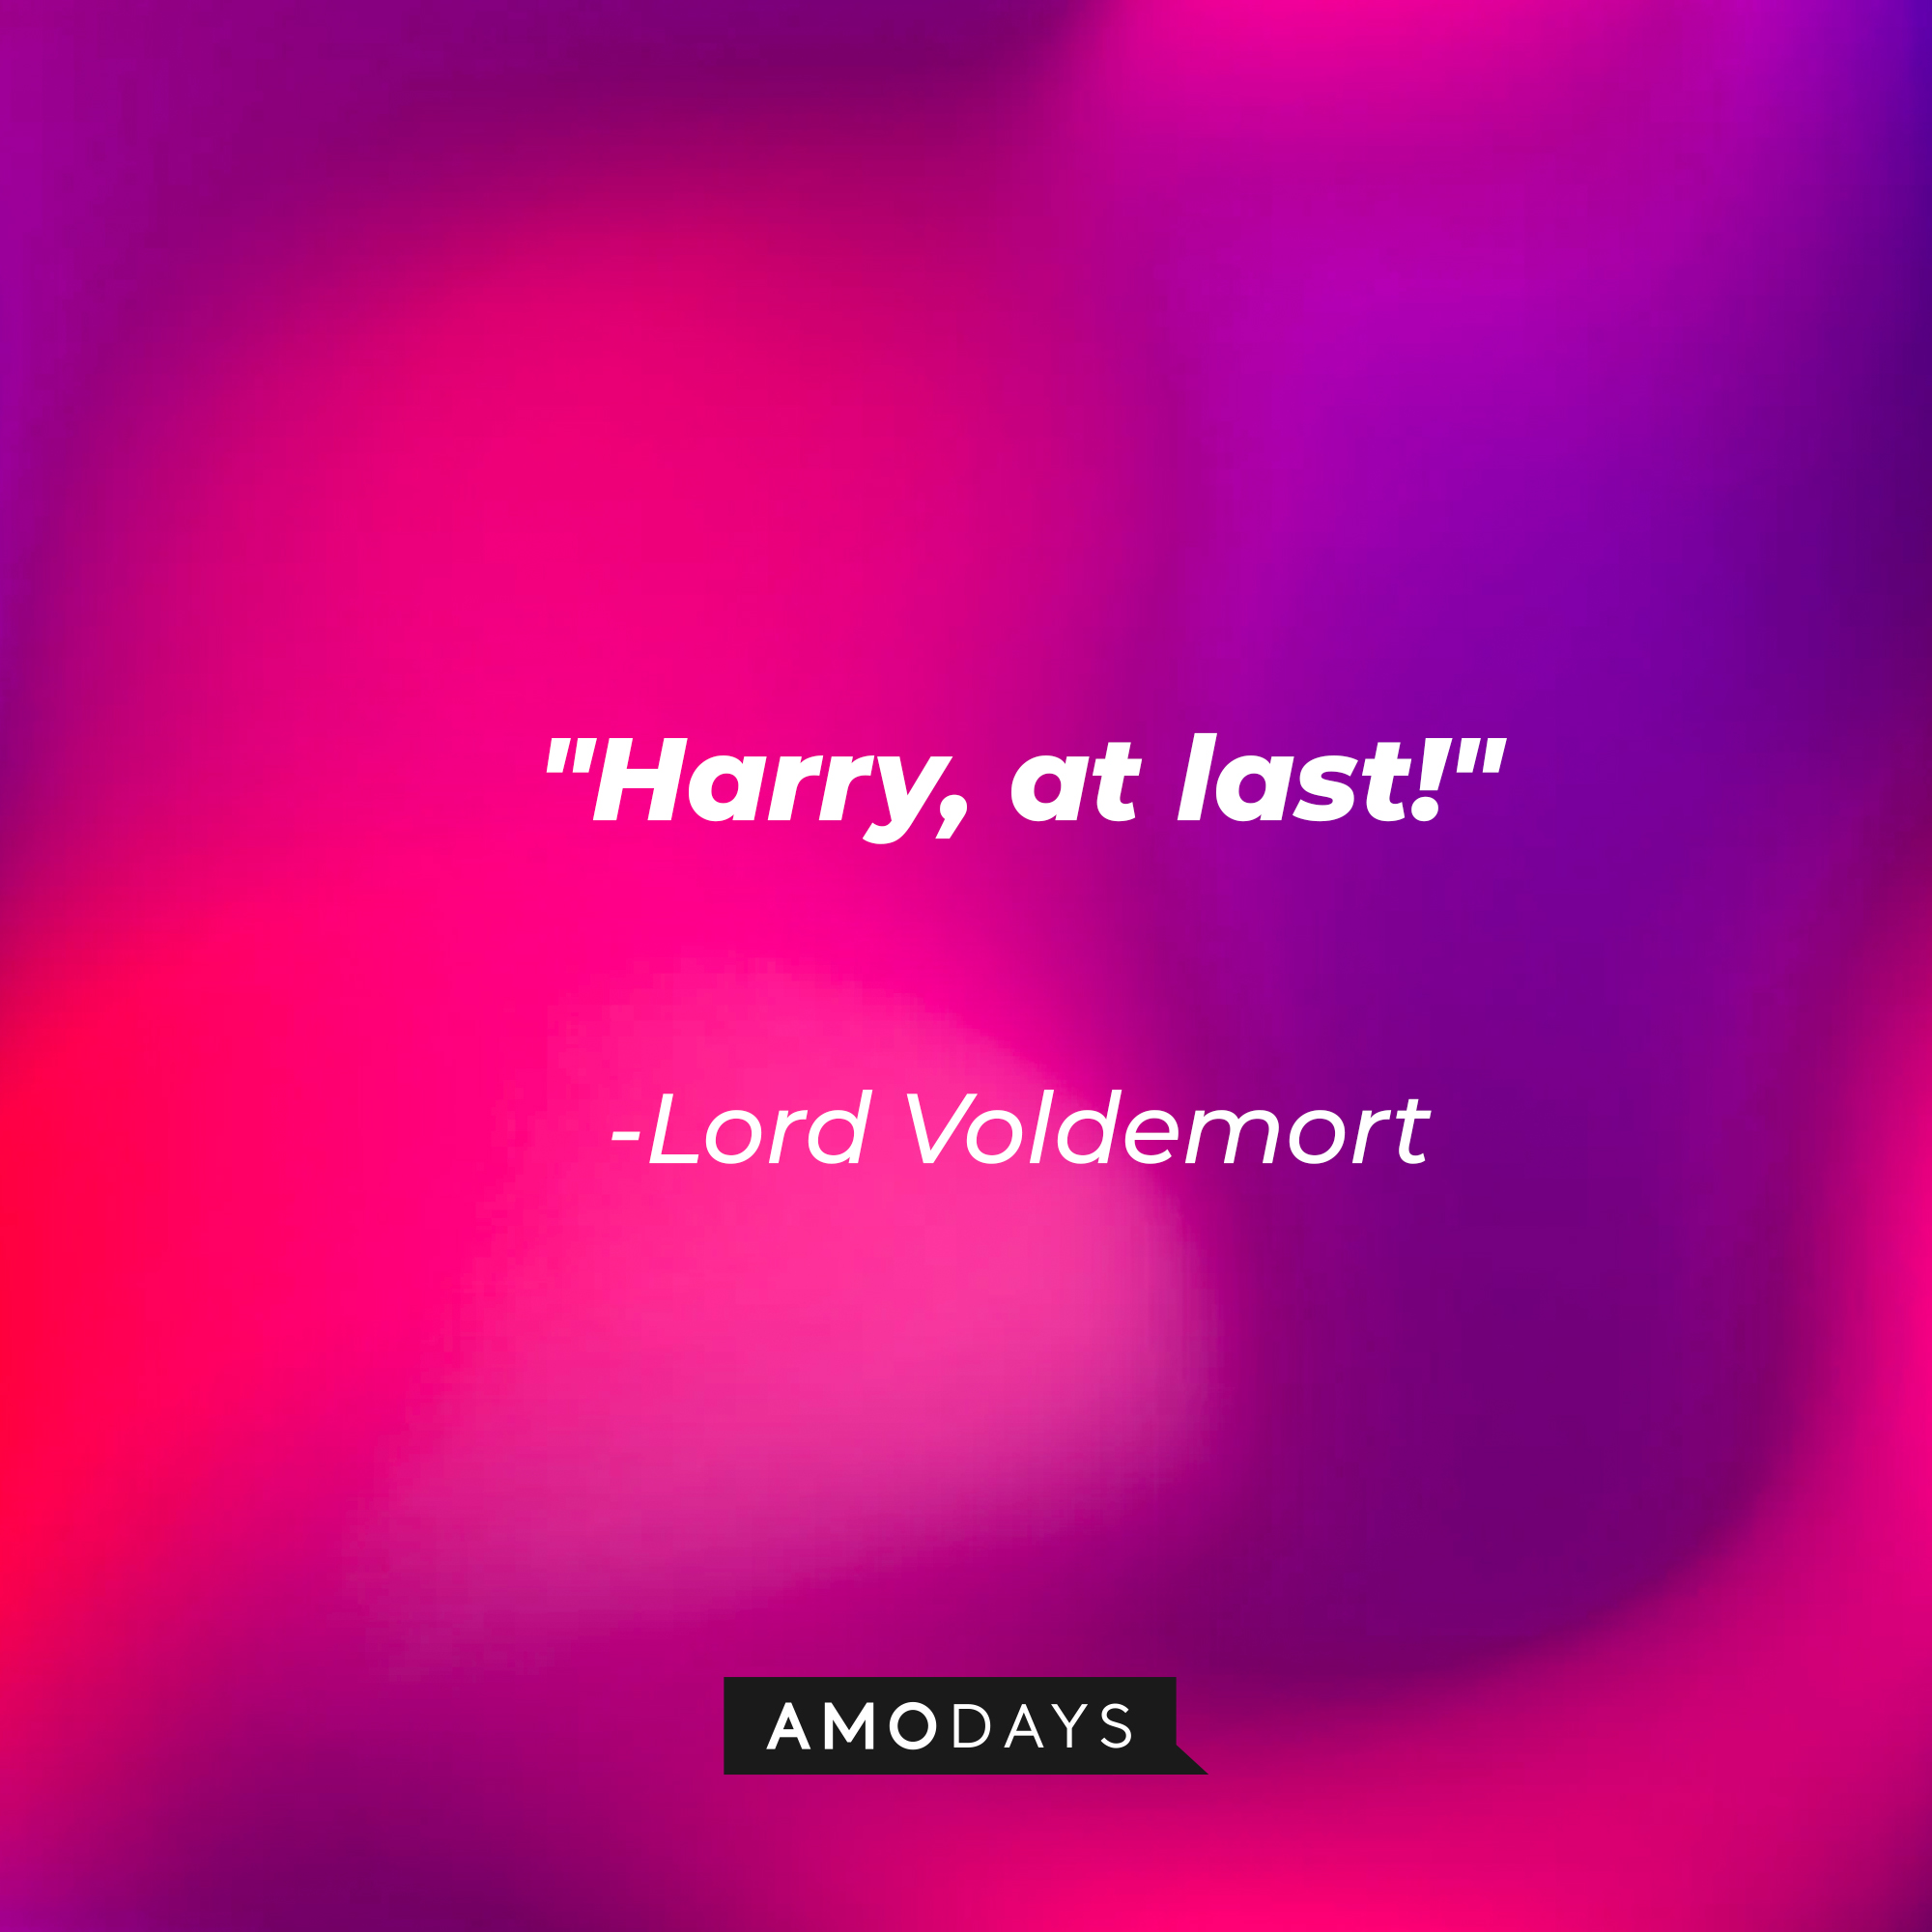 Lord Voldemort's quote: "Harry, at last!" | Image: Amodays